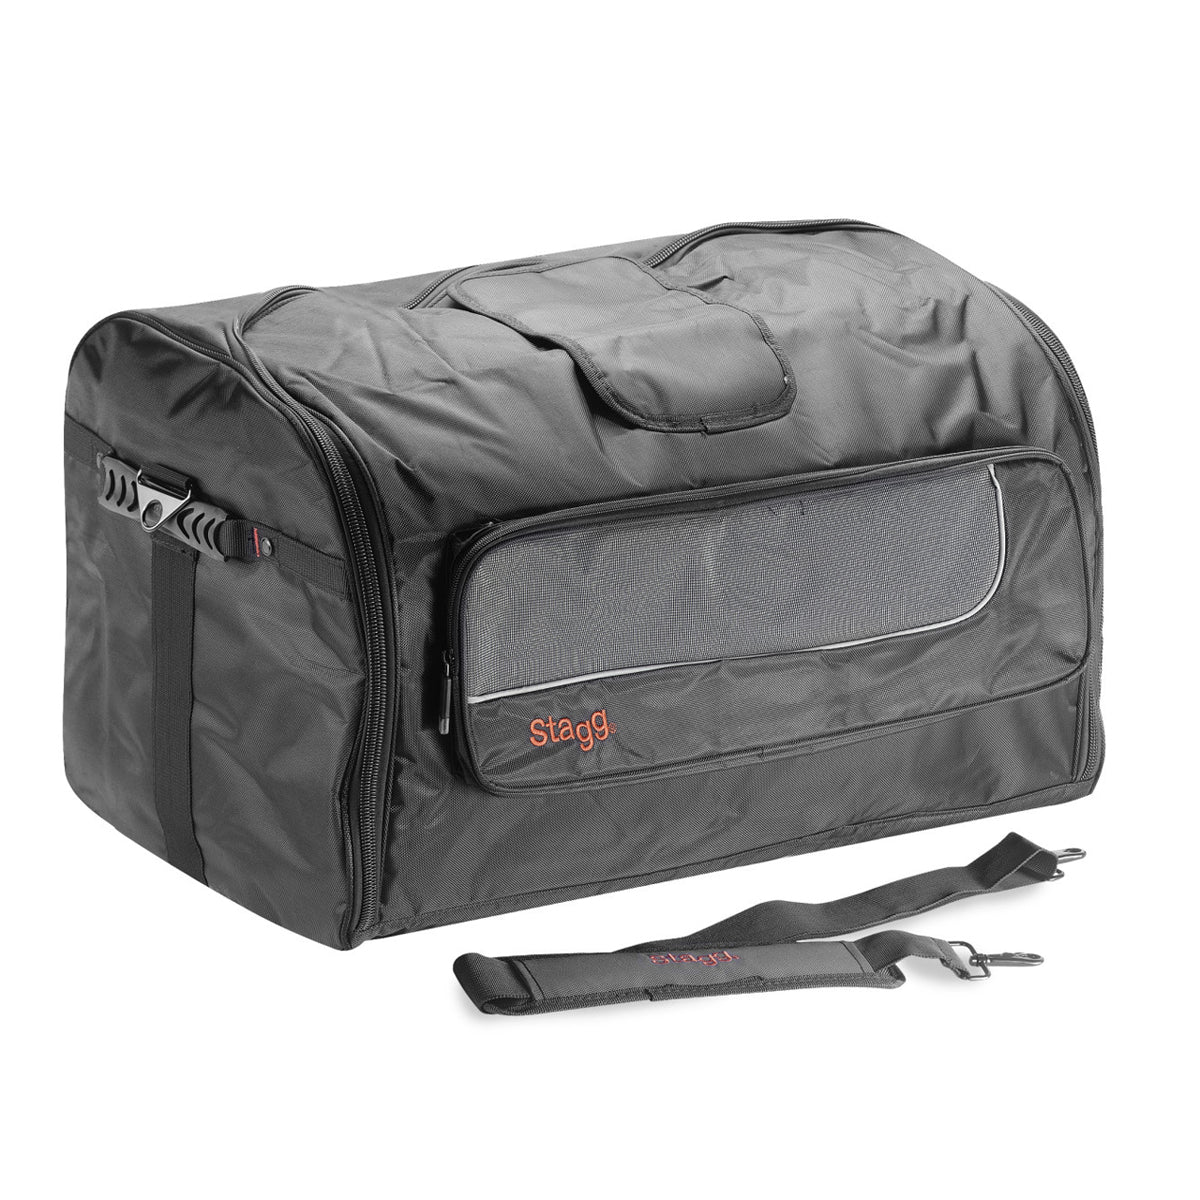 Stagg Padded Carry Bag for 12" PA Speakers